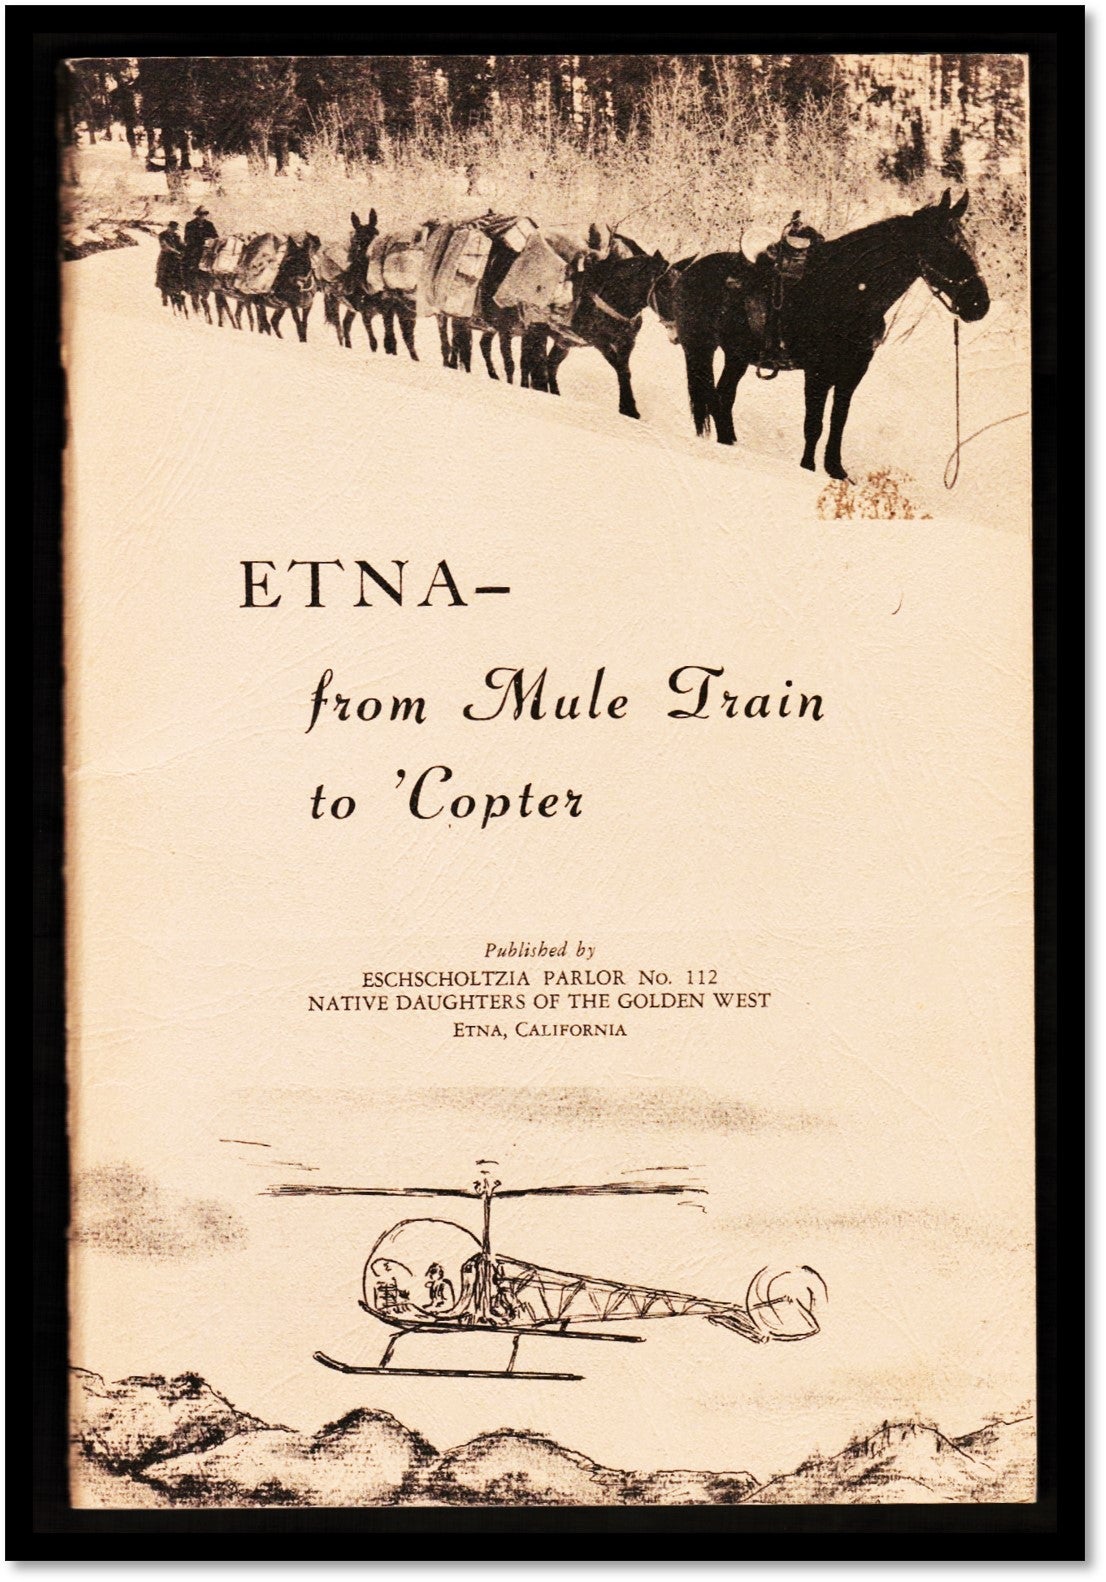 Etna: From Mule Train to 'Copter, a Pictorial History of Etna